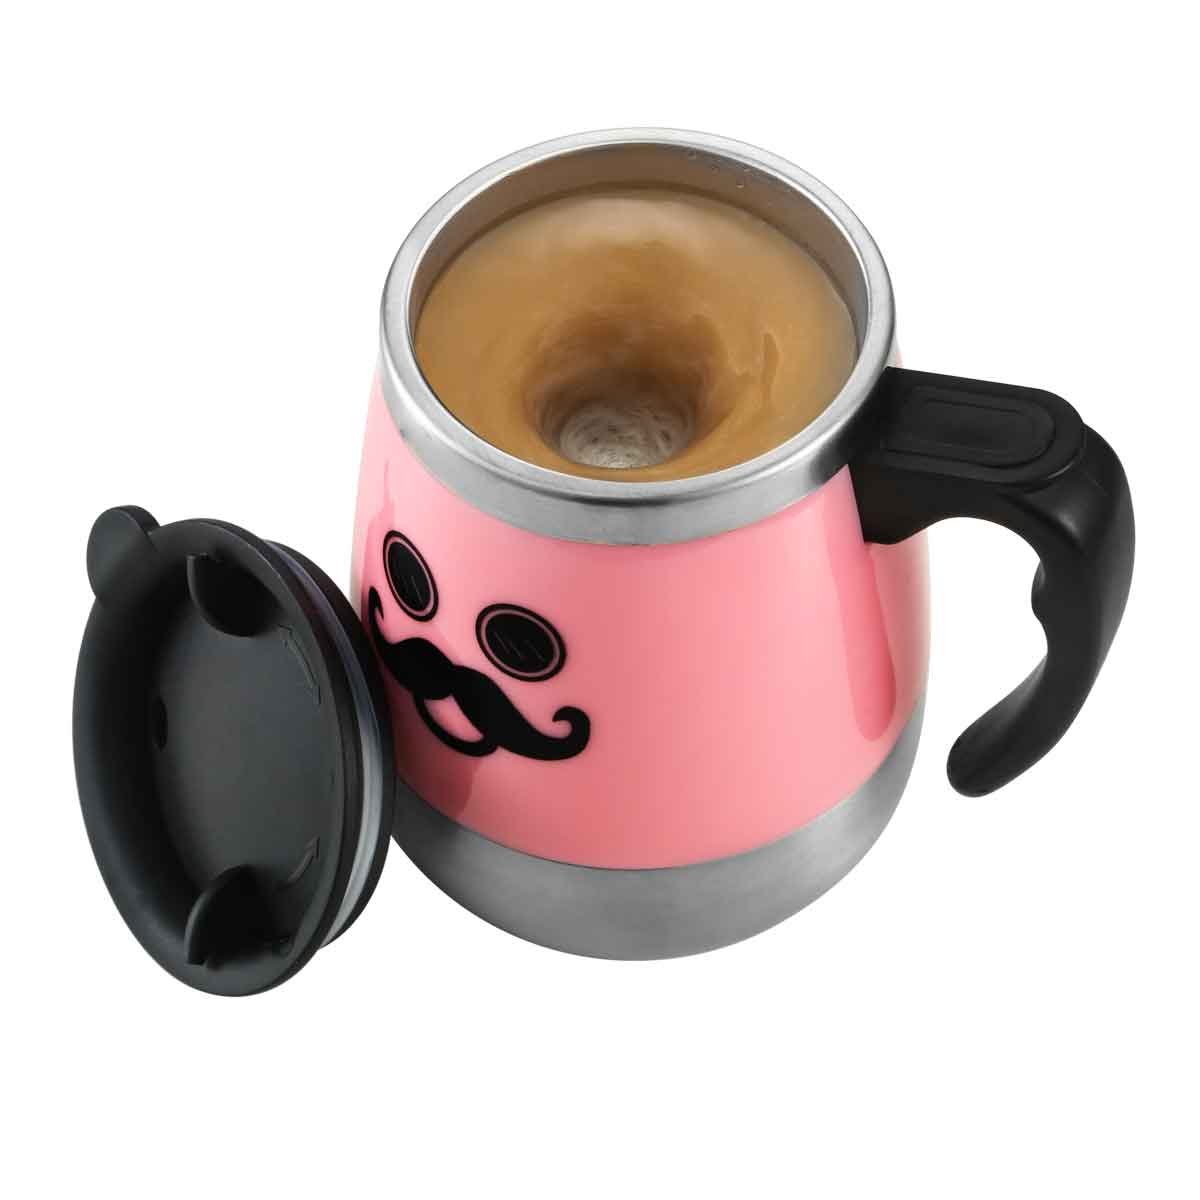 Got Your Eyes Set on a Self-Stirring Mug? Here Are Some of the Best from   2020 for You!